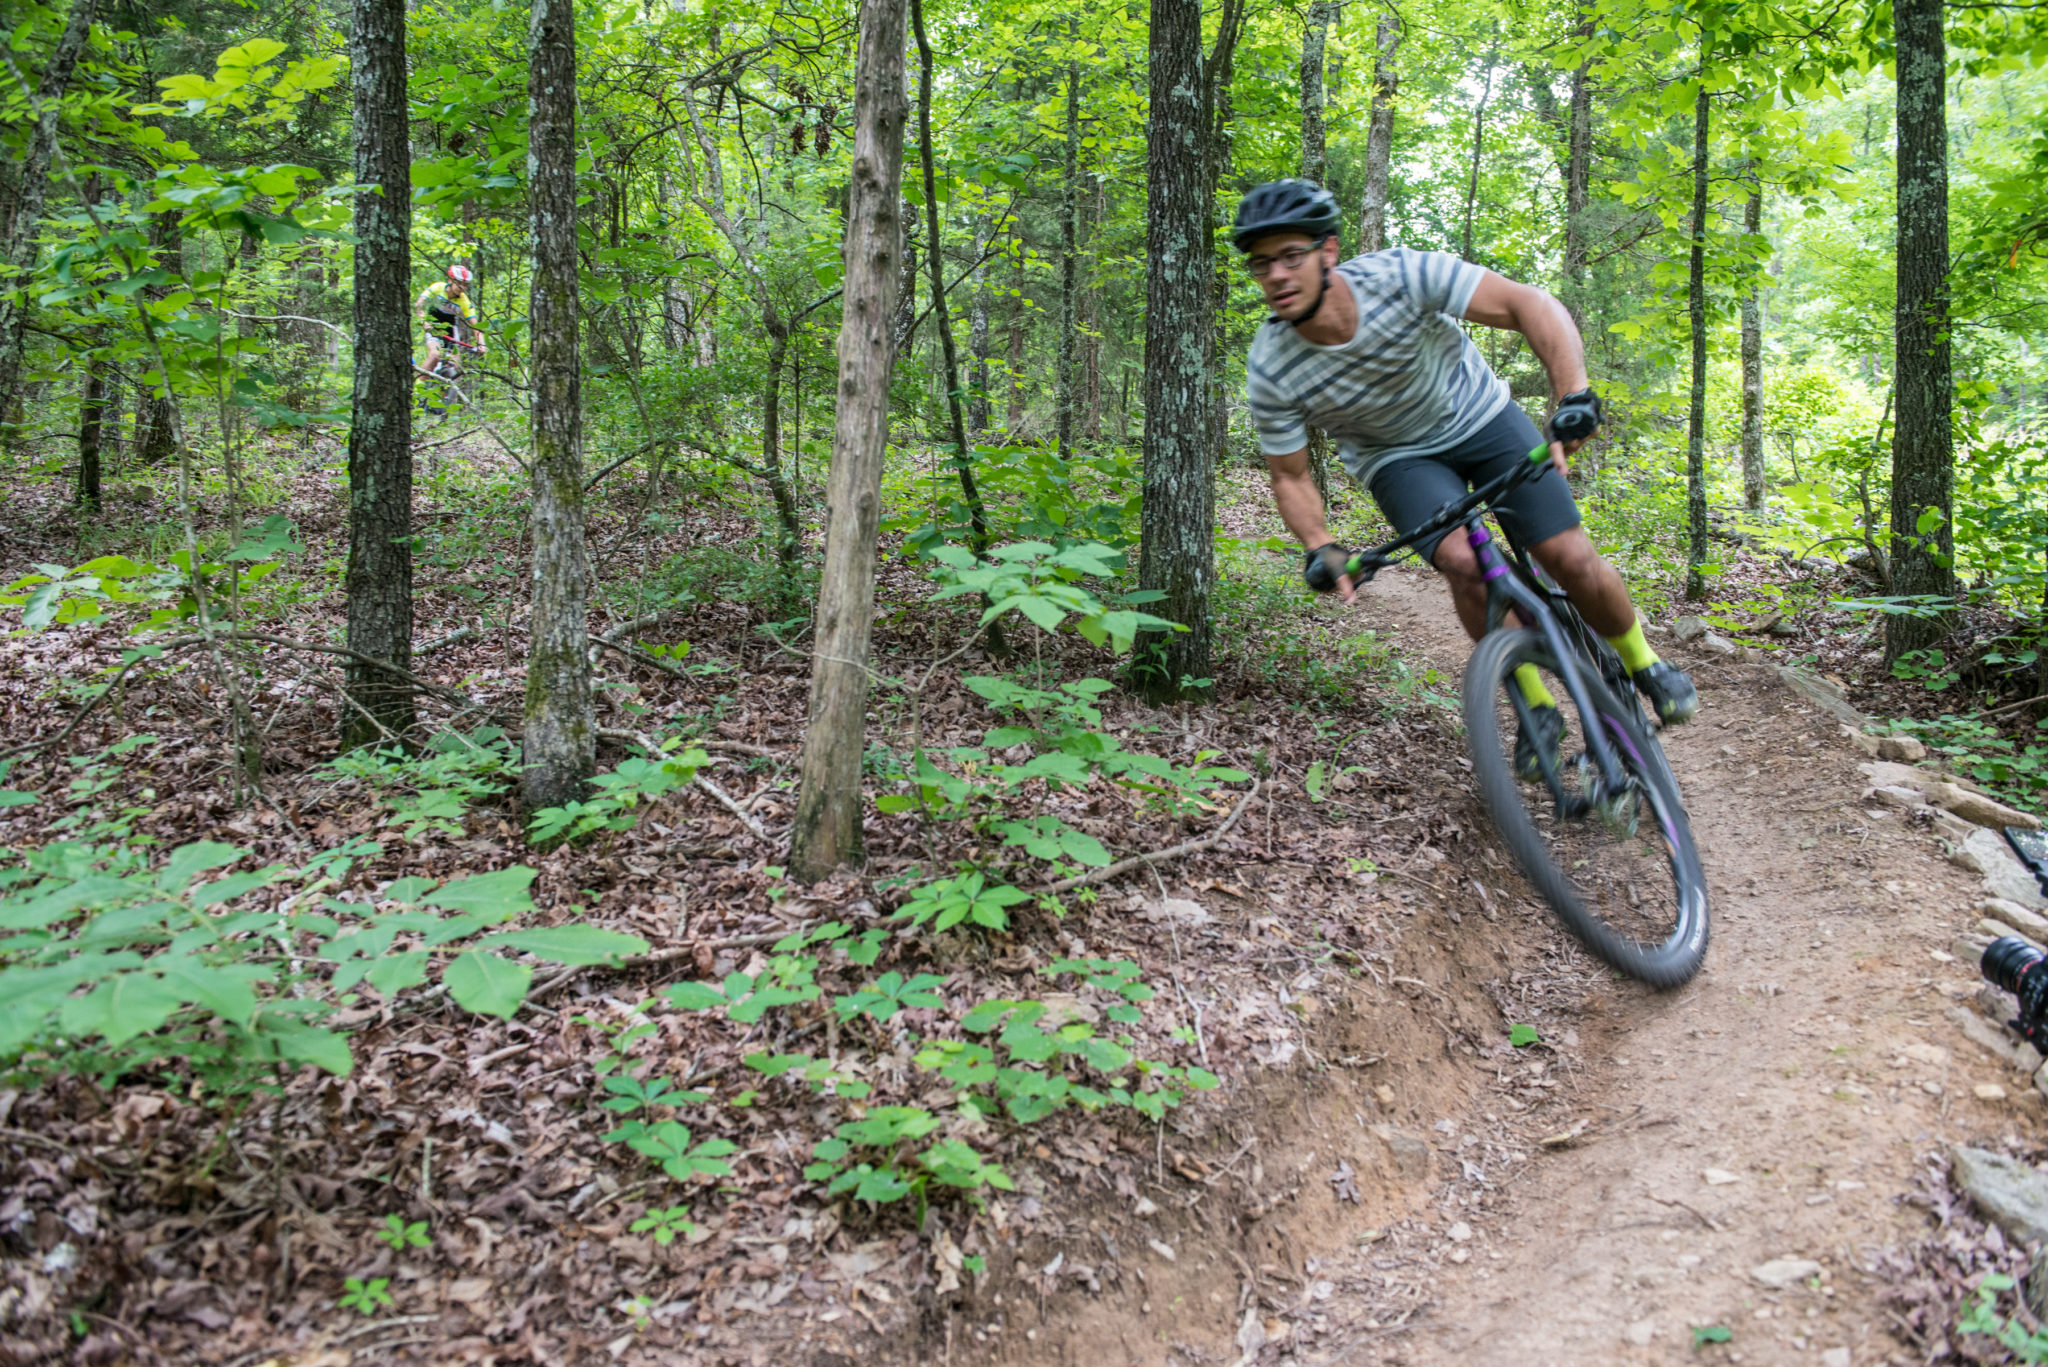 8 Stunning Mountain Bike Trails in Central & Northeast Arkansas Only